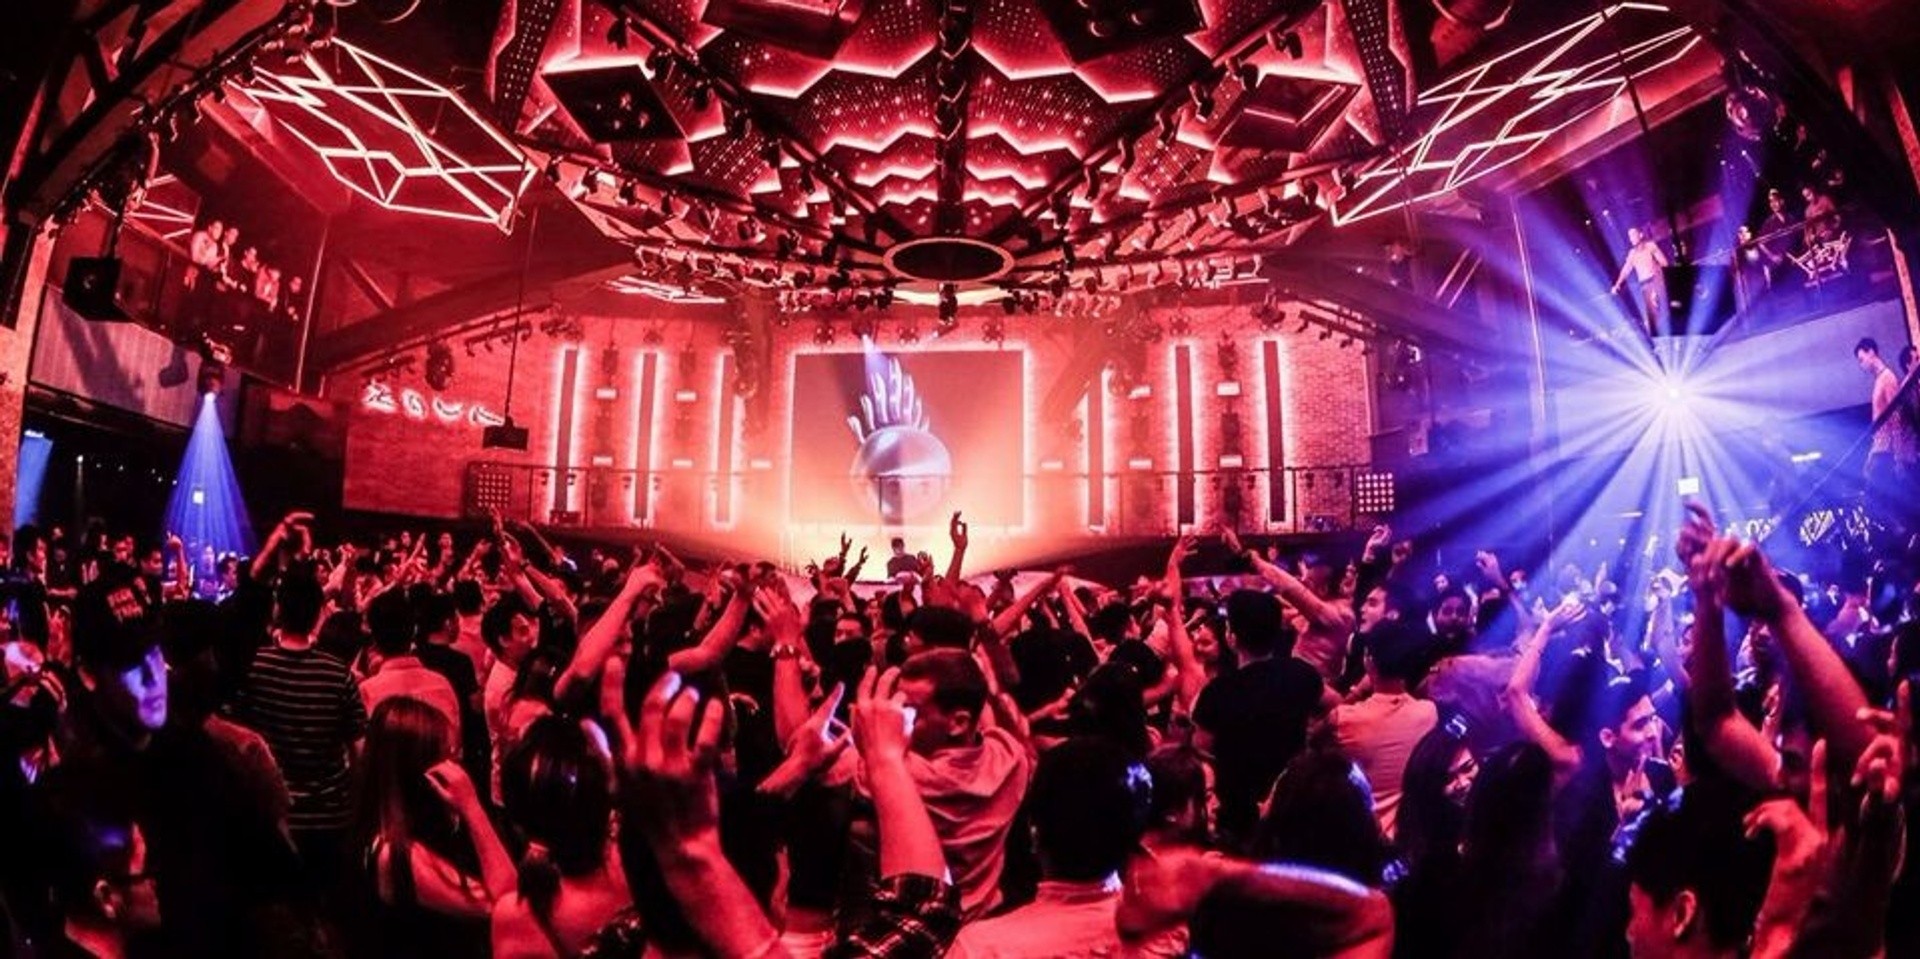 DJ Mag's Top 100 Clubs ranks Zouk as the best in Asia at #4, CÉ LA VI ascends to #80